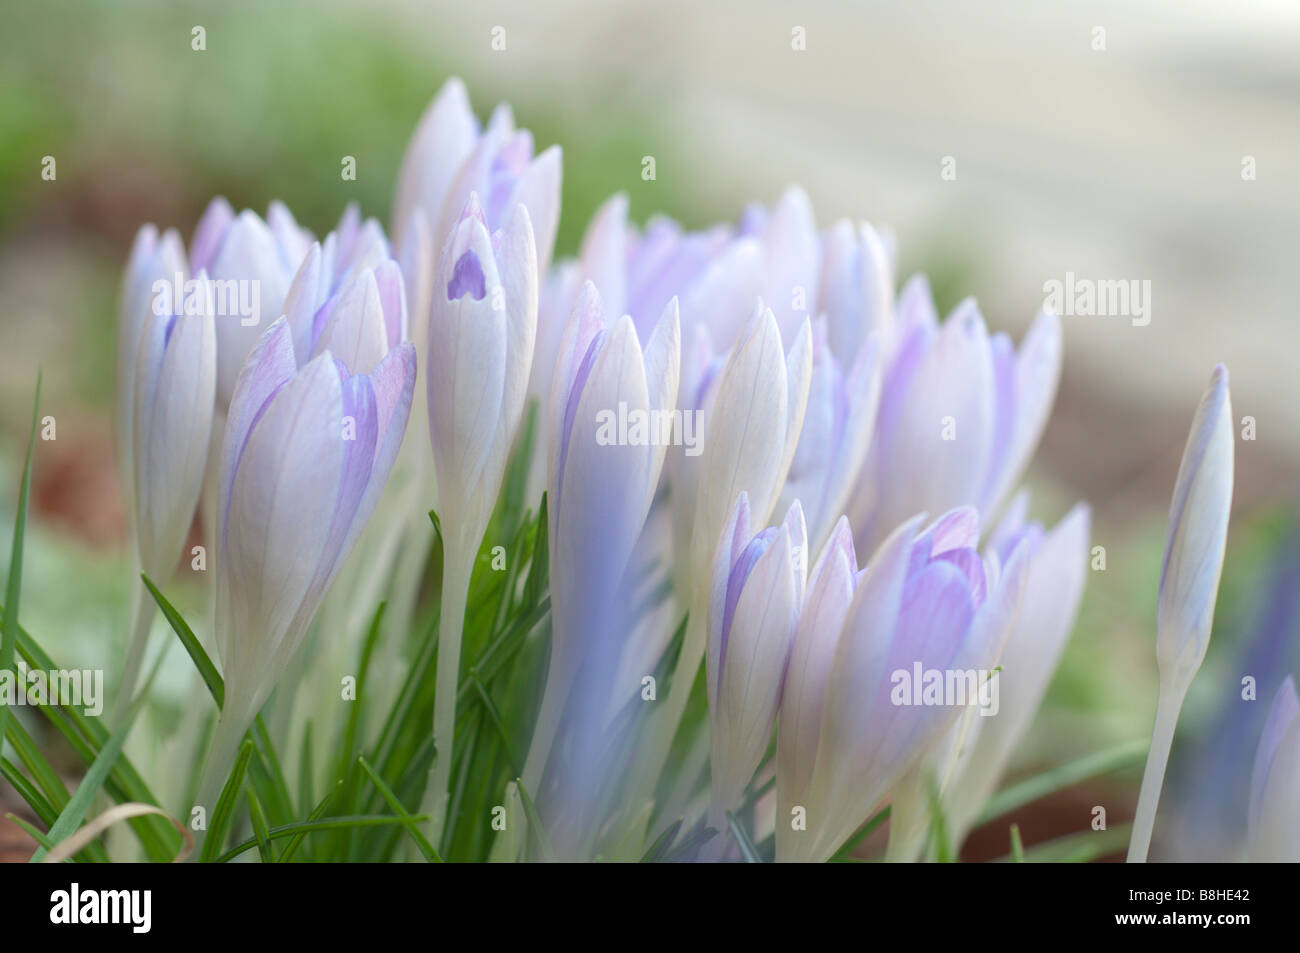 White and purple spring flowers ready to bloom Stock Photo